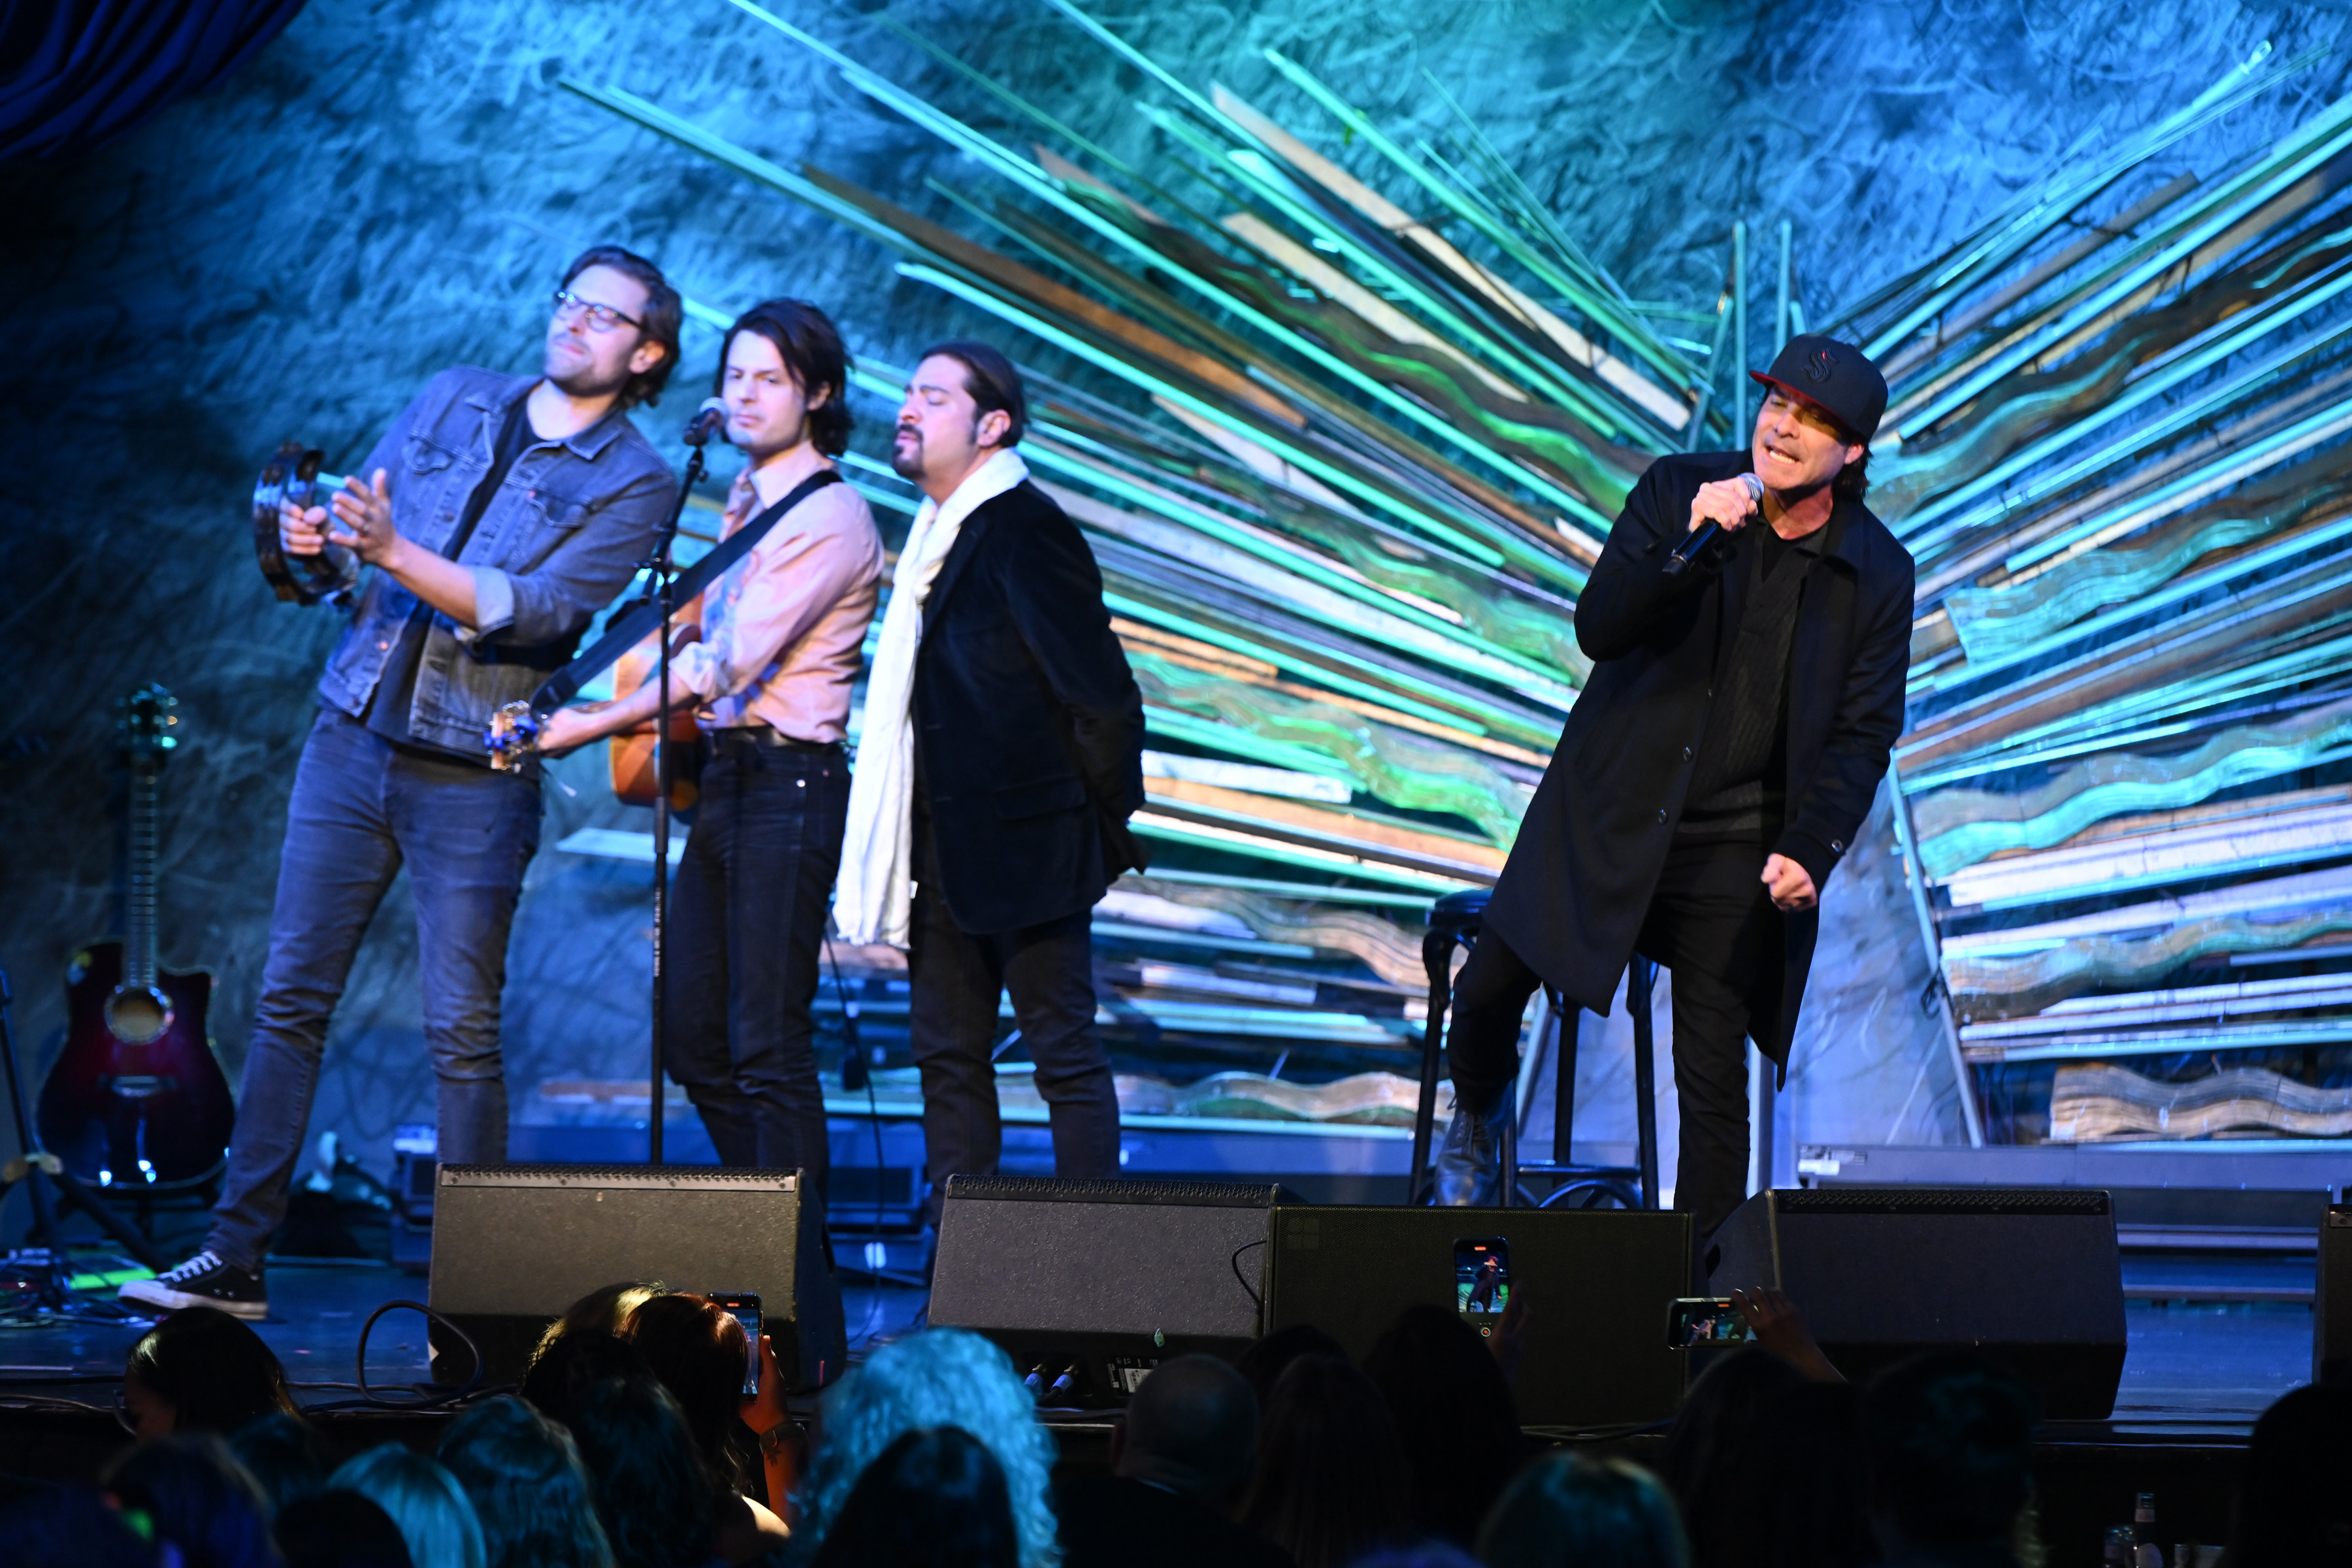 Pat Monahan and Train perform at Musicians On Call's Hope for the Holidays concert for caregivers